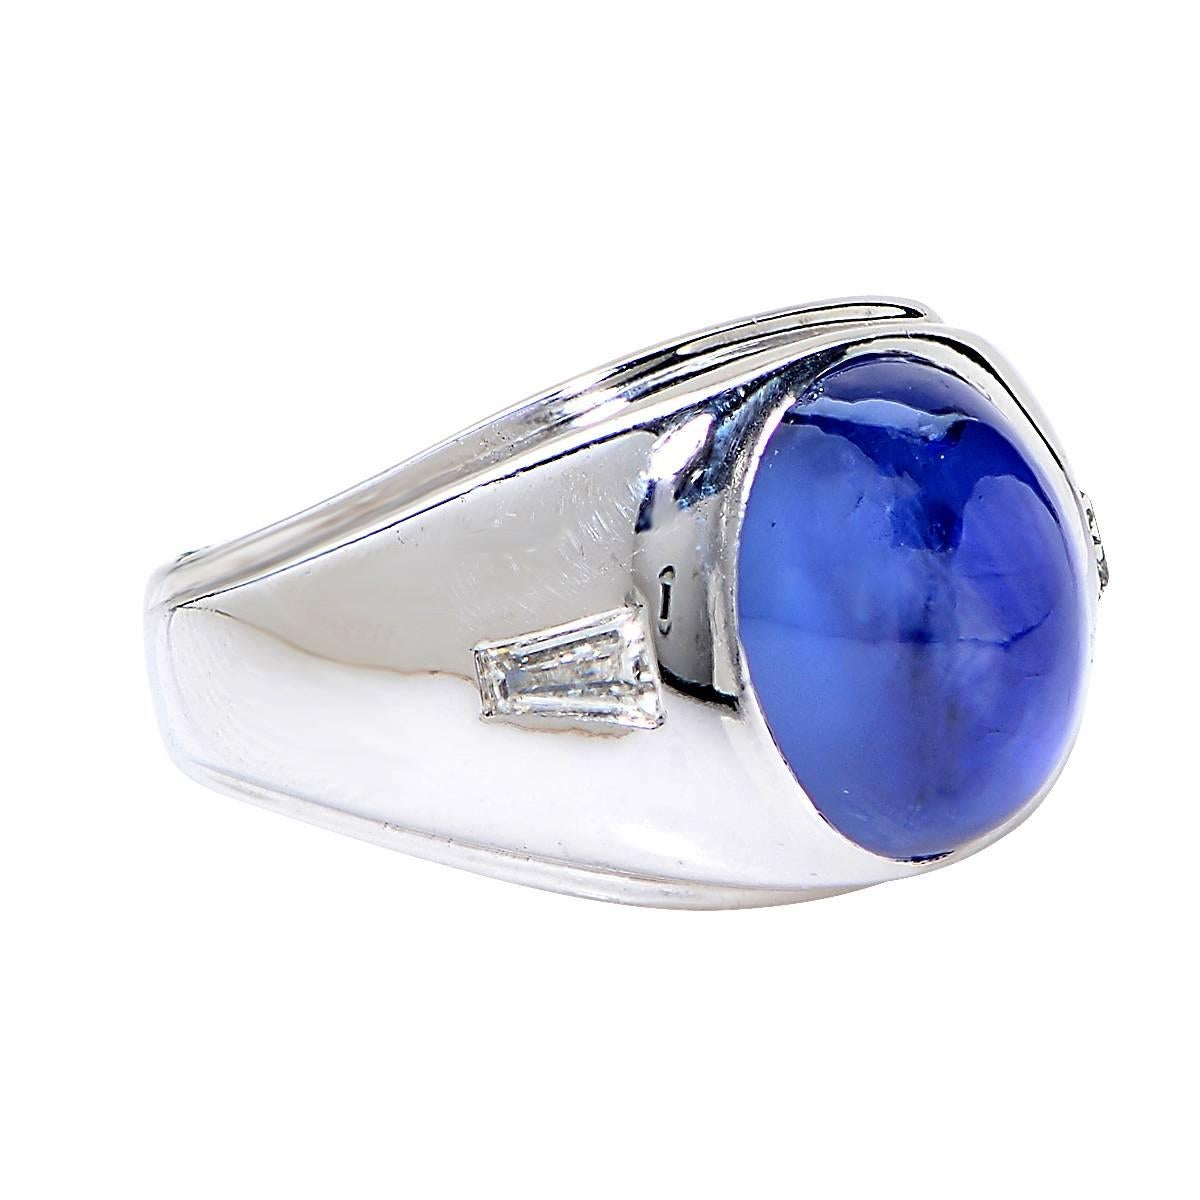 14 Karat White Gold Ring Set with an Unheated Star Sapphire Weighing Approximately 14.00 Carats & 2 Tapered Baguettes Weighing Approximately .50 Carats.

Ring Size: 8.25
Weight: 20.21 grams

This Star Sapphire Ring is Accompanied by a Retail